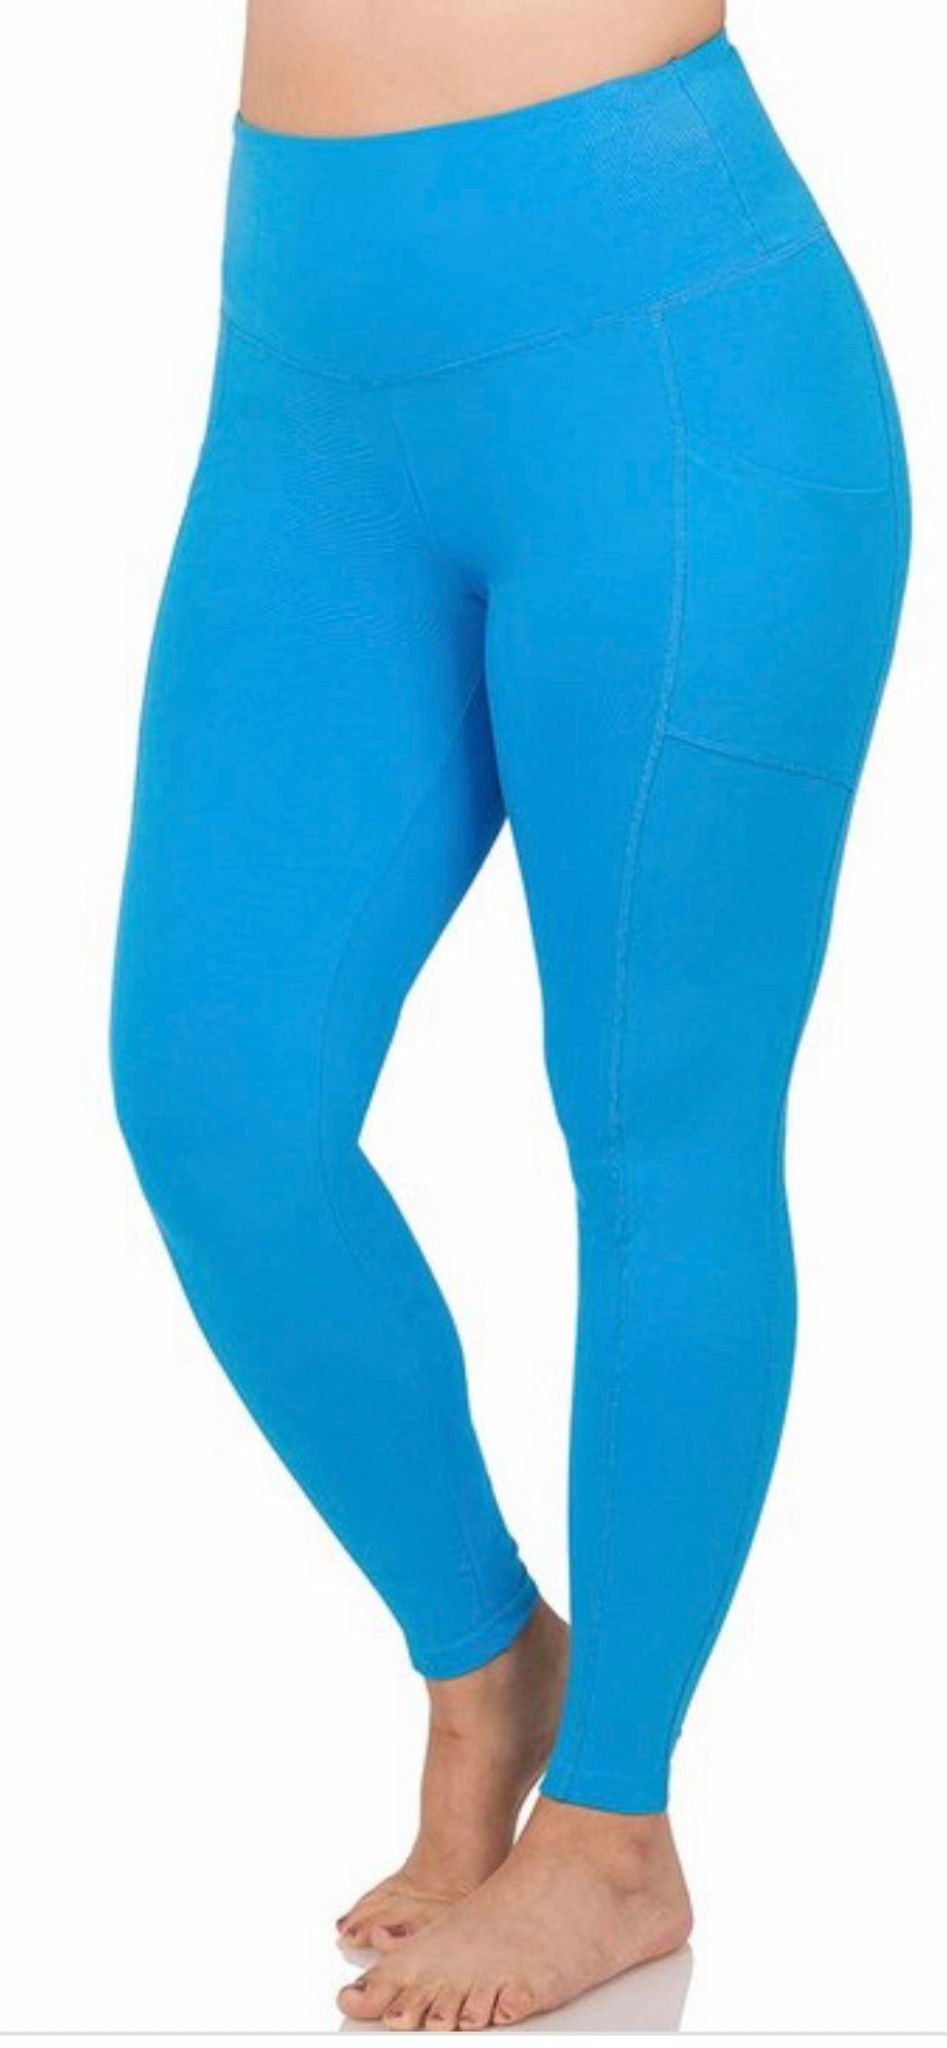 Zenana Leggings with pockets Many colors to choose from